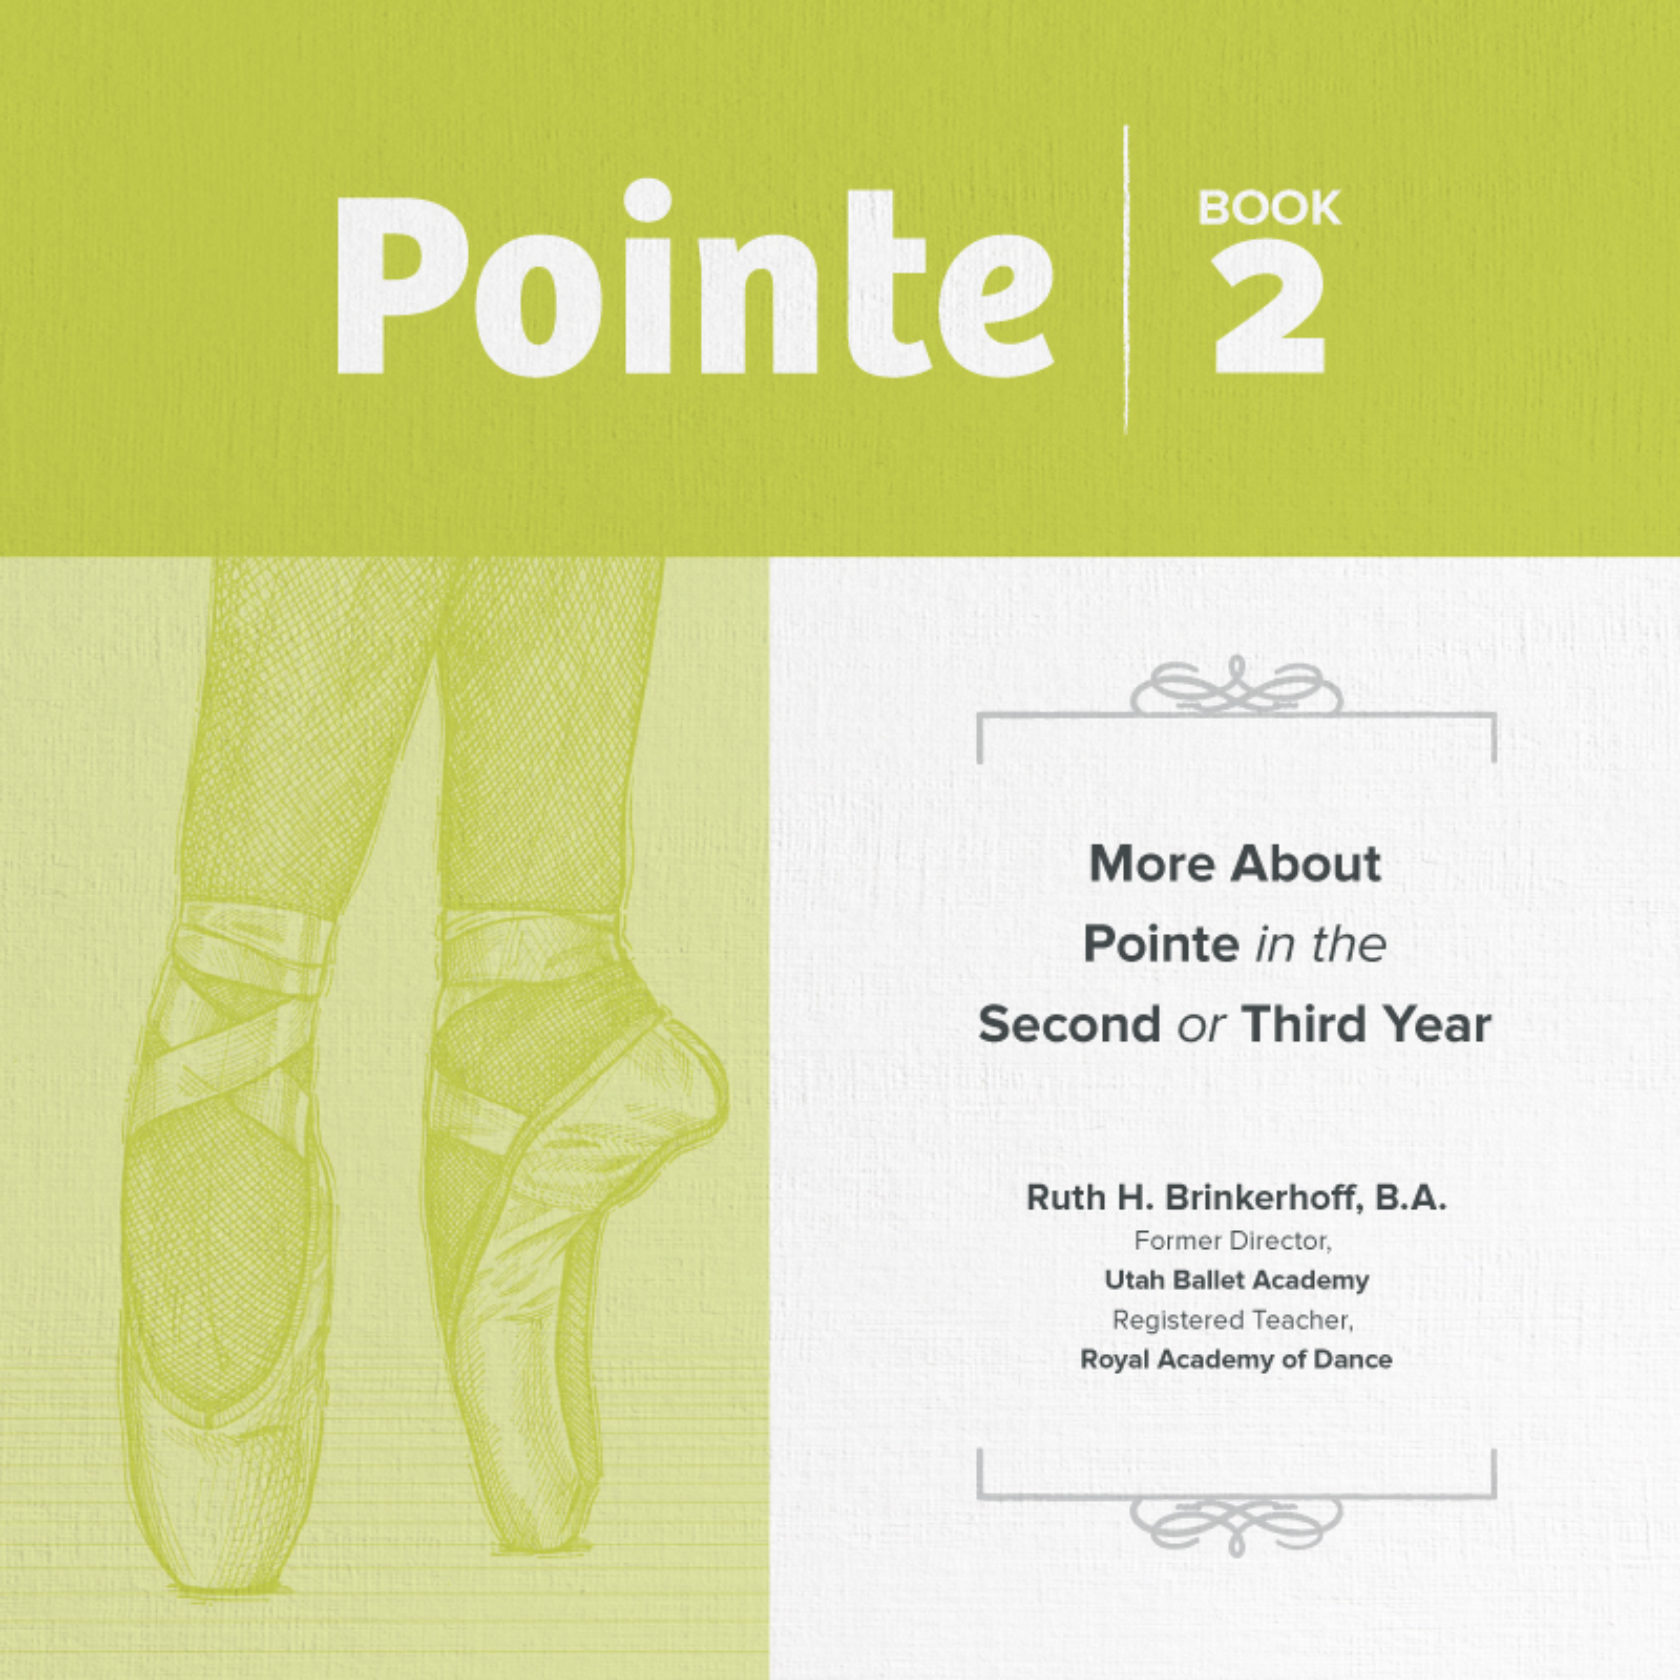 Pointe 2: More About Pointe